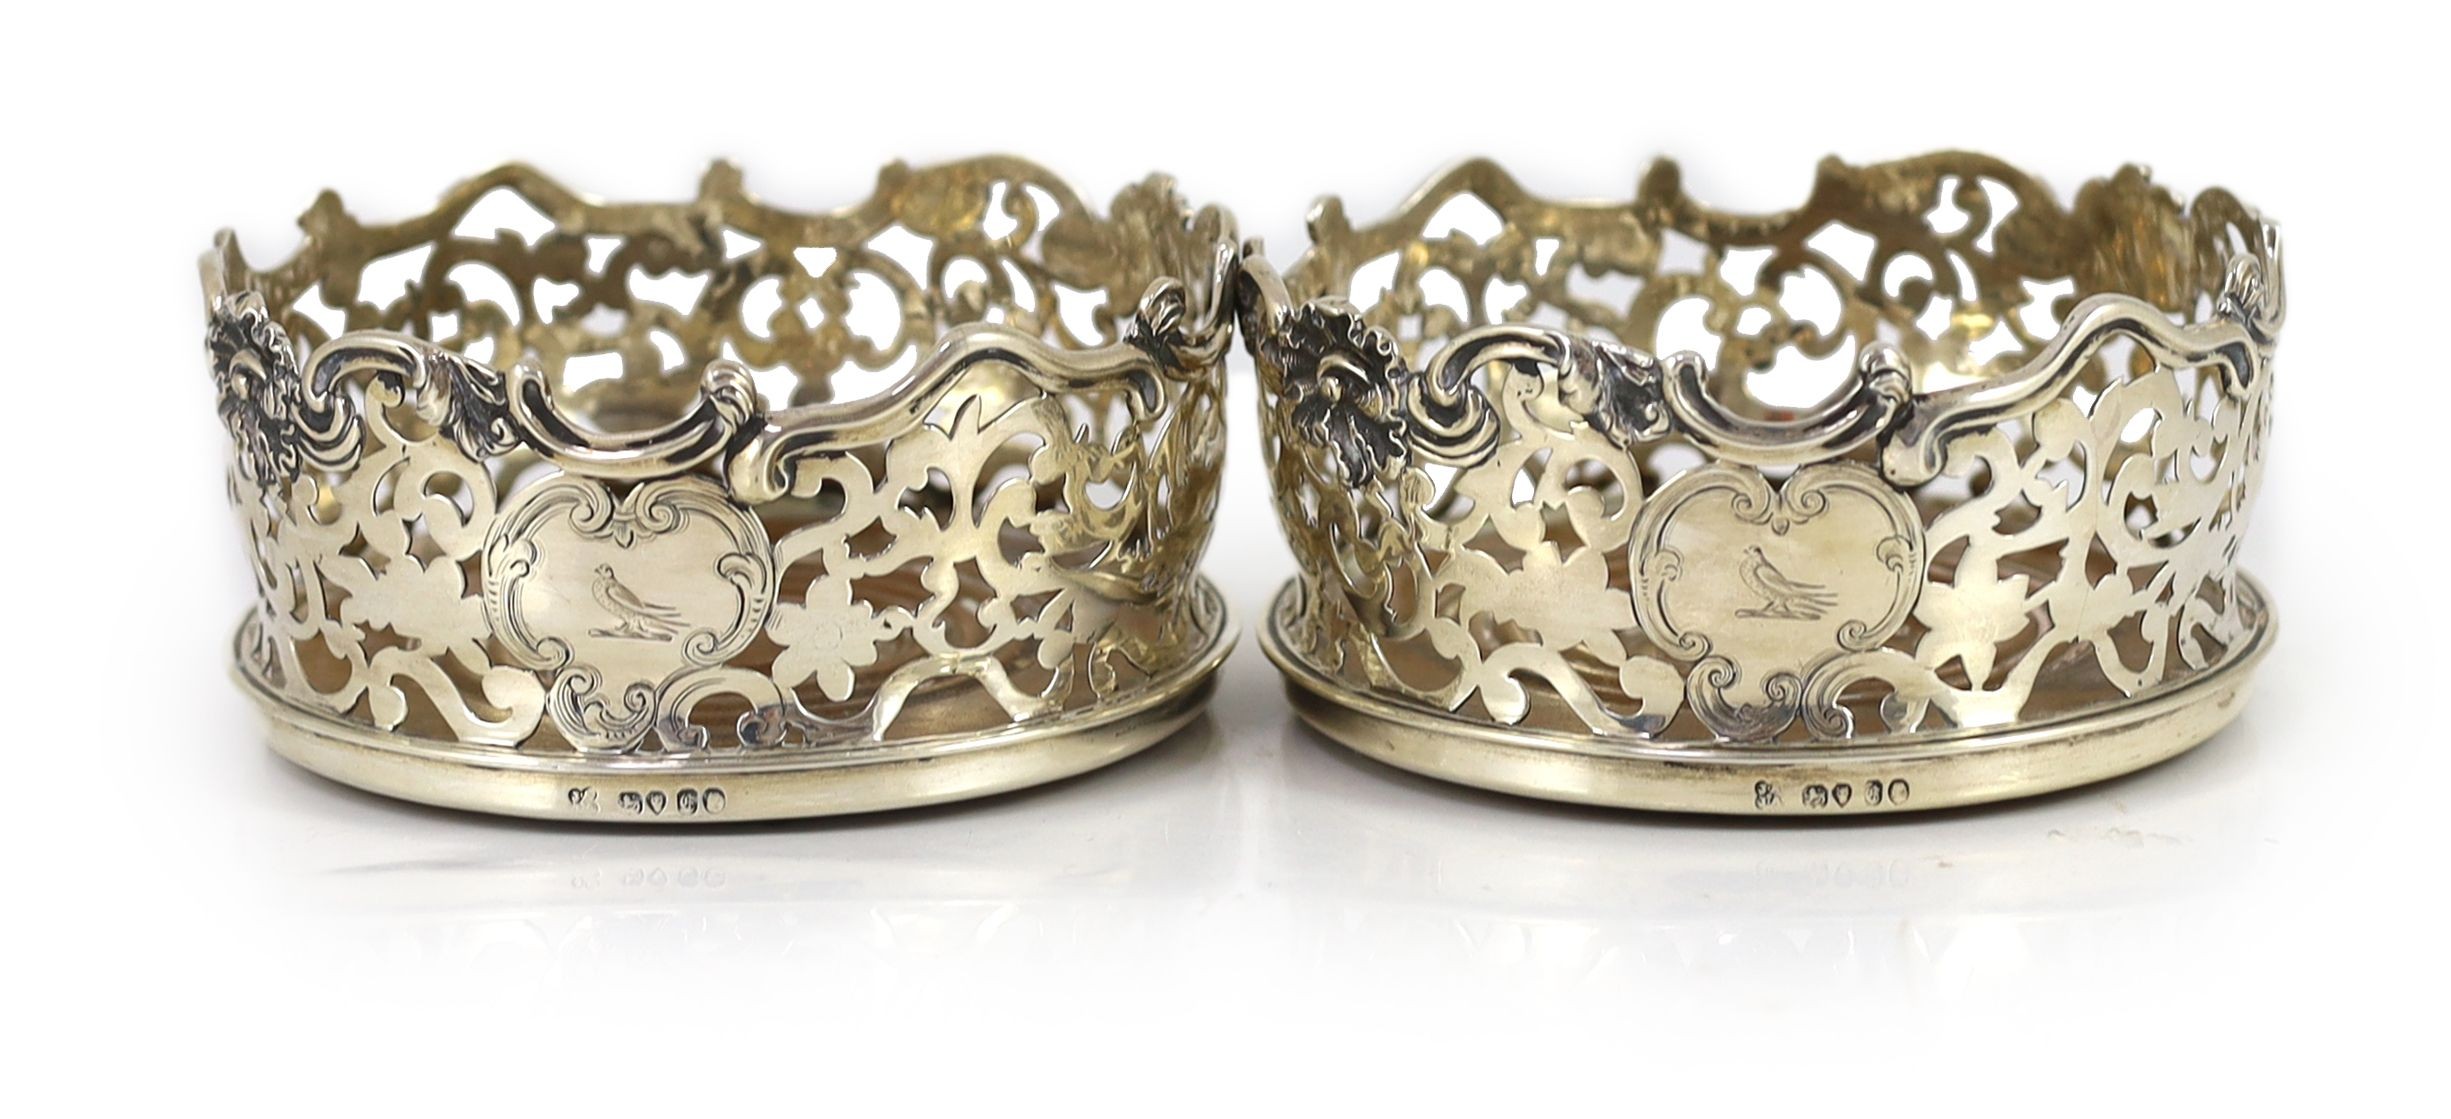 A pair of early Victorian pierced silver mounted wine coasters, by Joseph & Joseph Angell